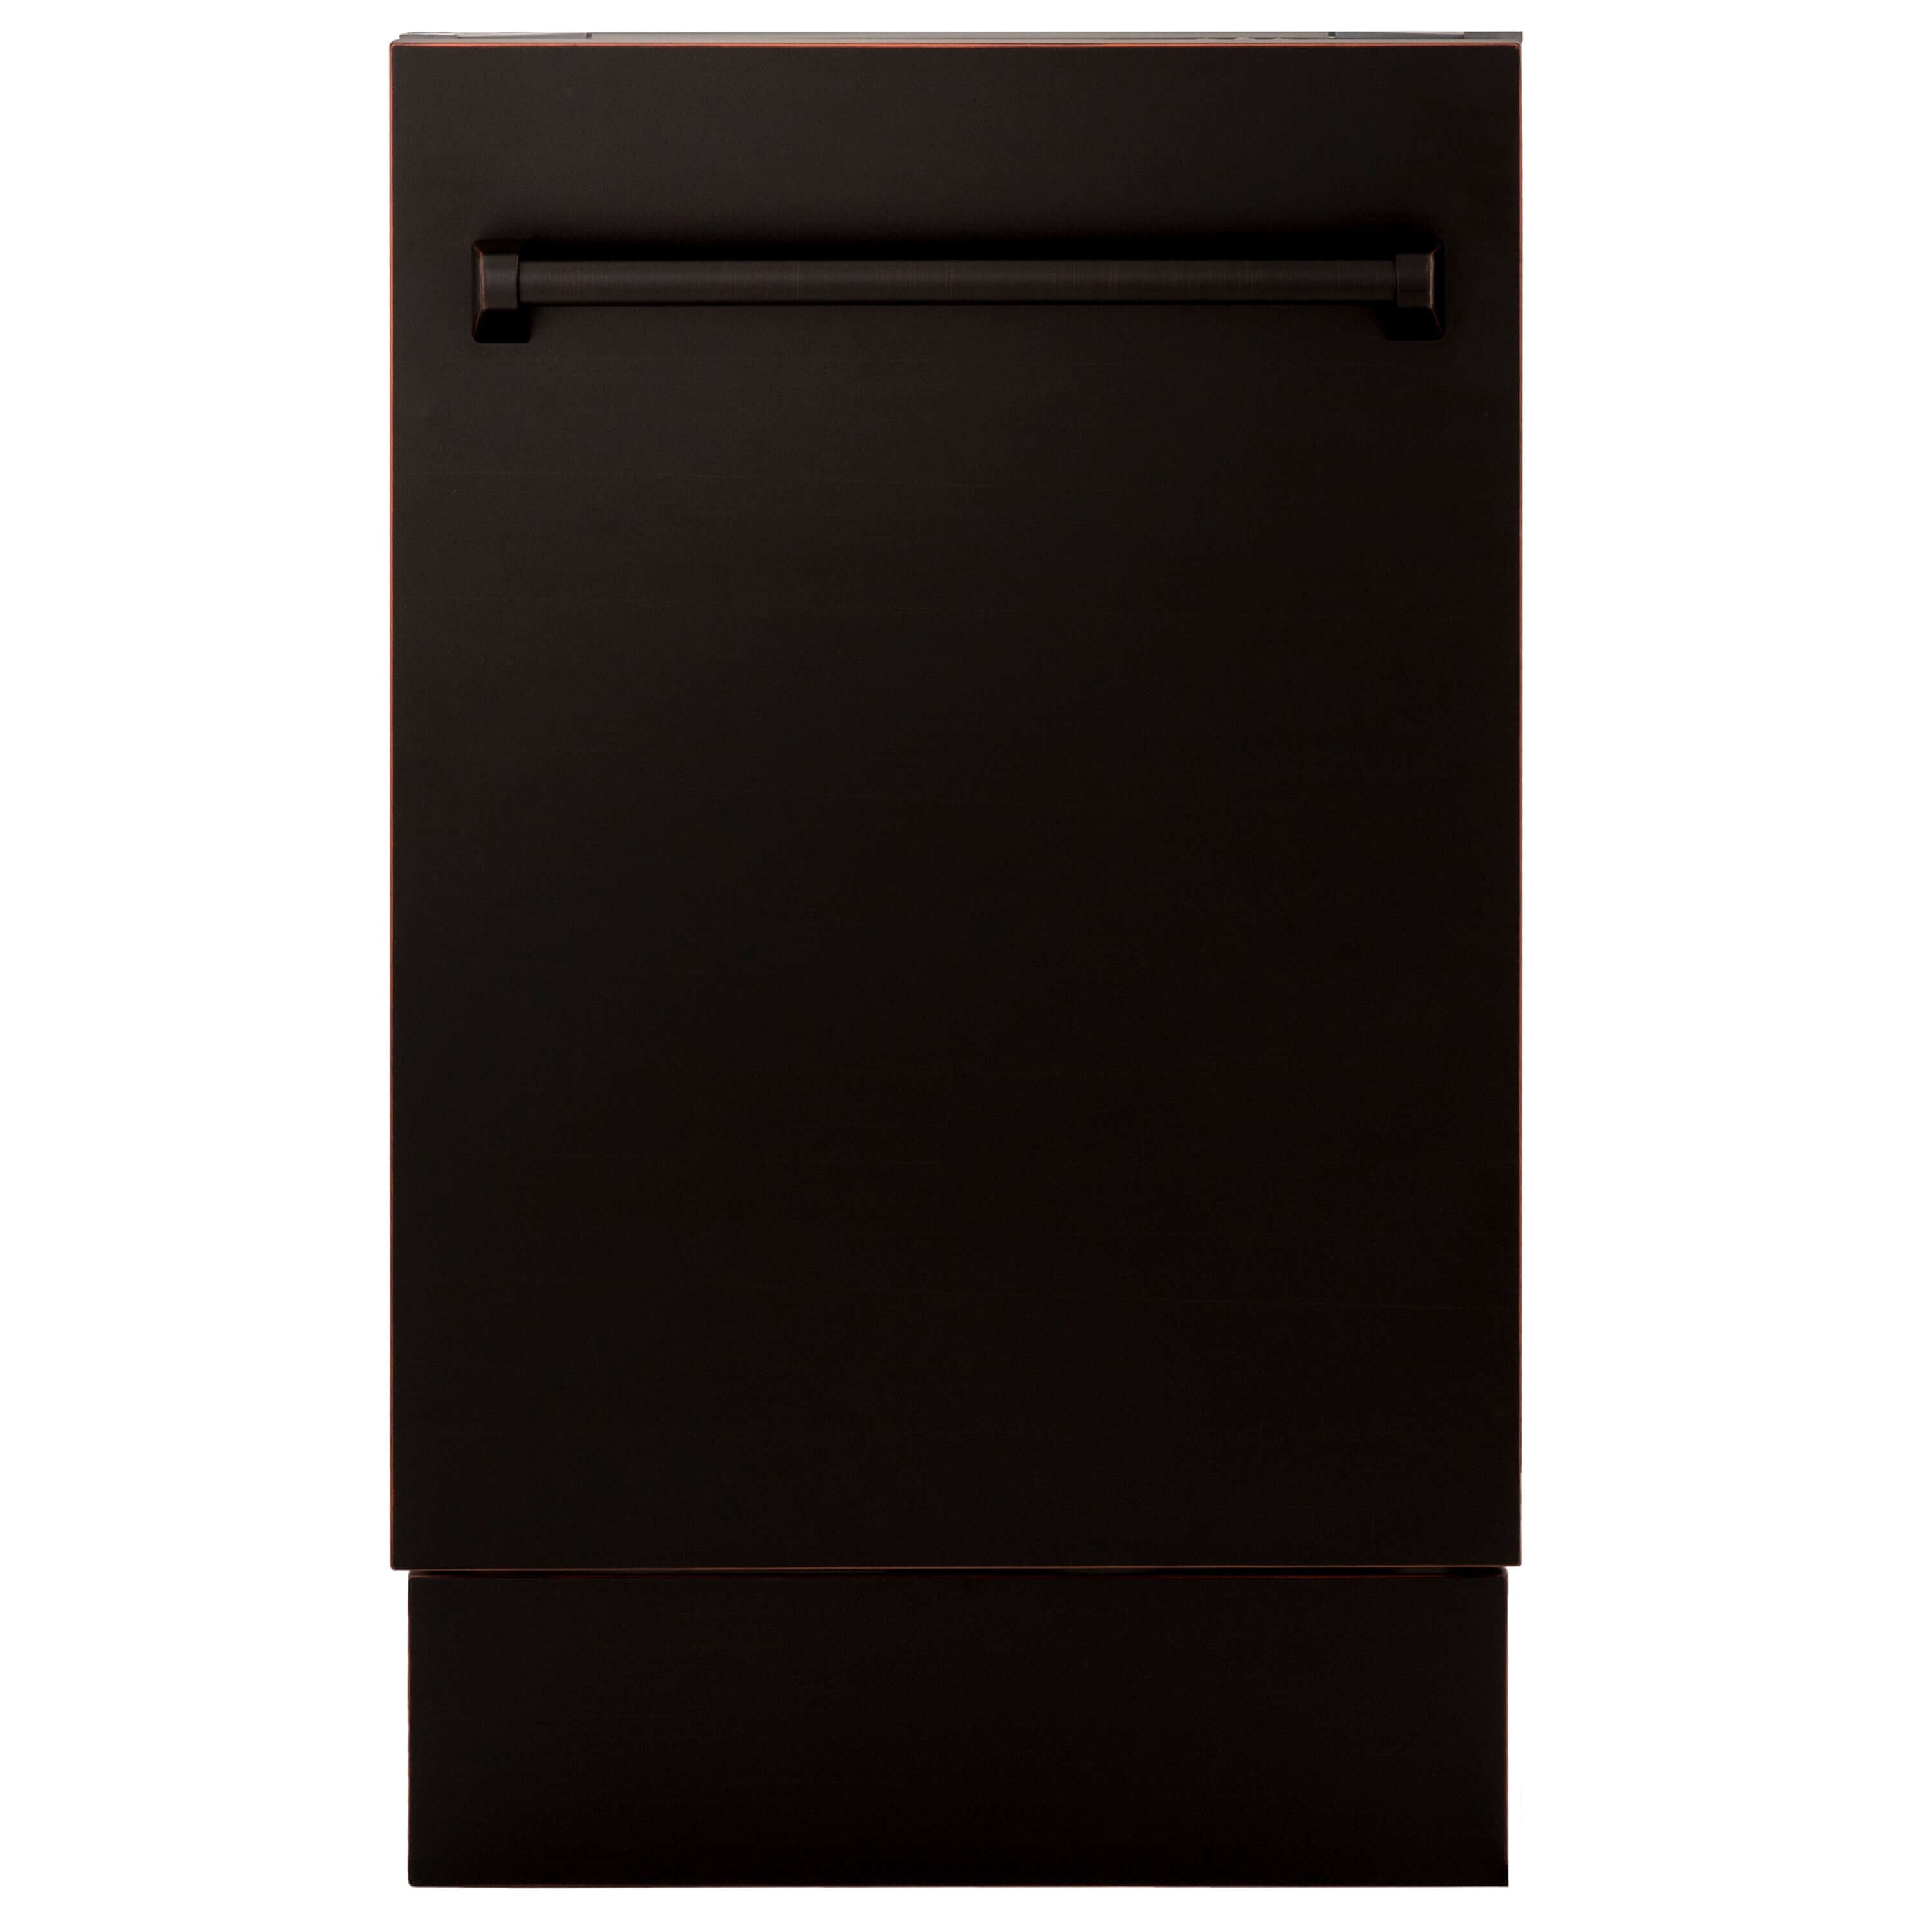 ZLINE 18 in. Tallac Series 3rd Rack Top Control Built-In Dishwasher in Oil Rubbed Bronze with Stainless Steel Tub, 51dBa (DWV-ORB-18) front, closed.